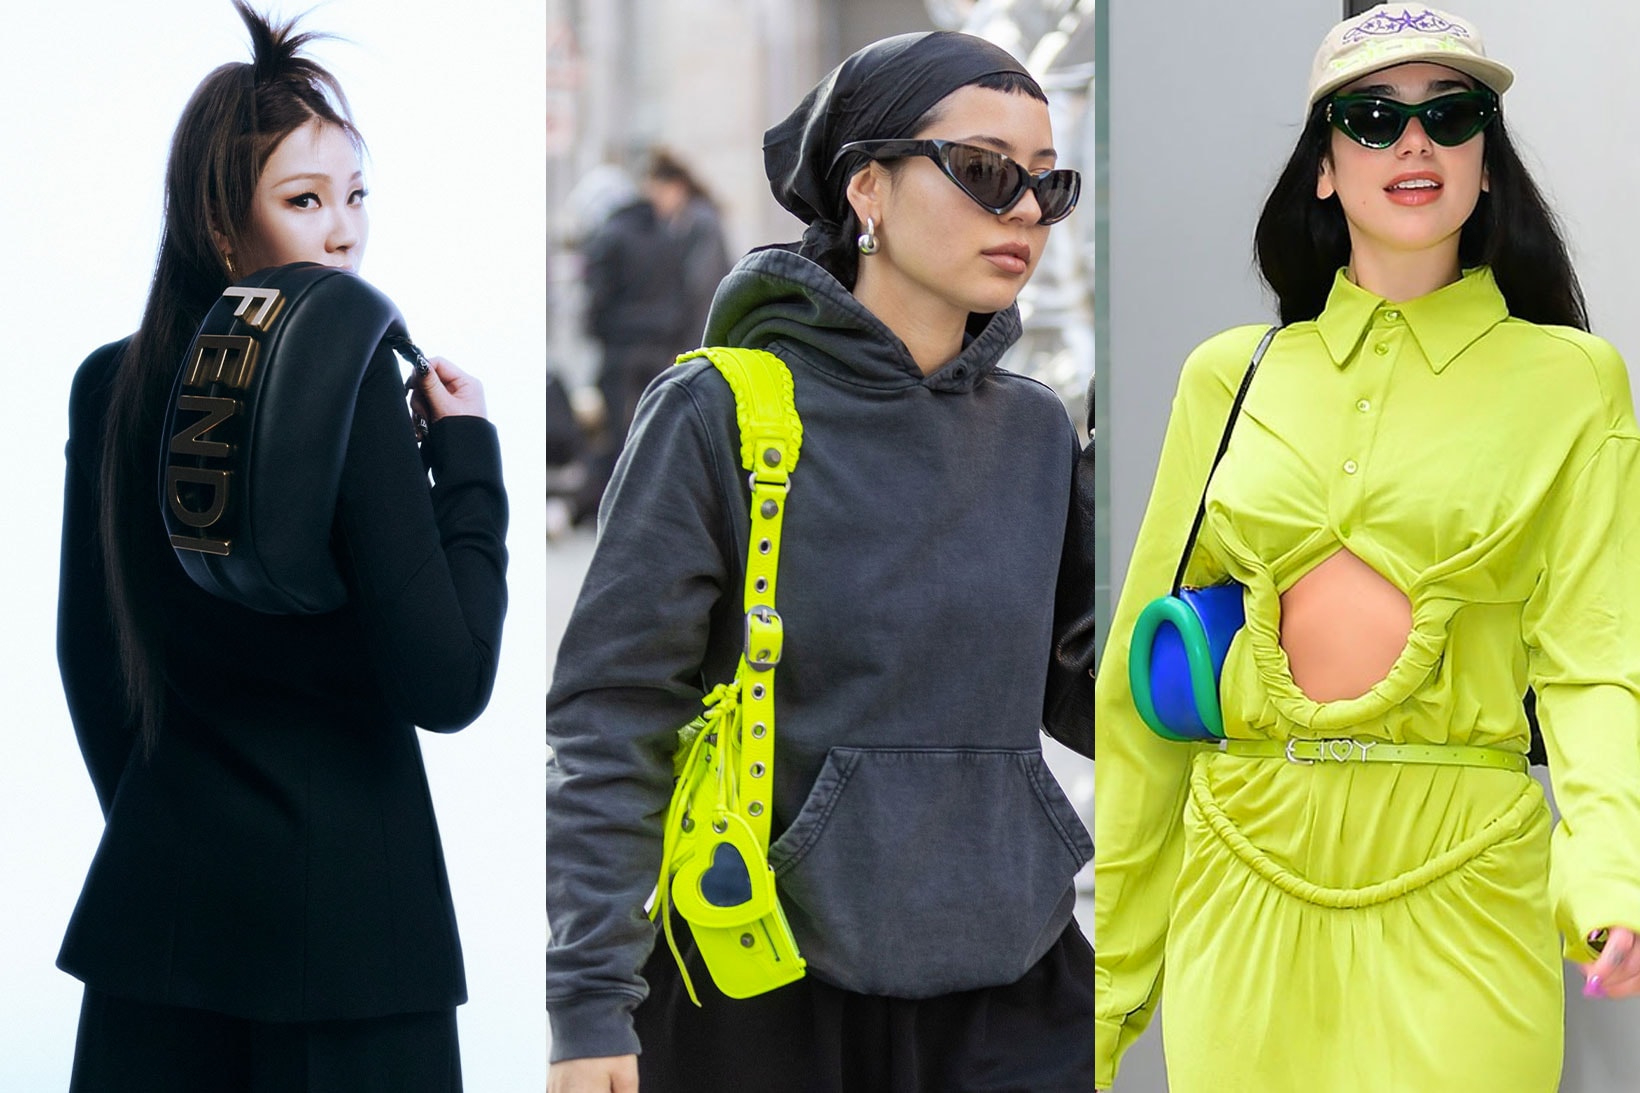 These Are the 14 Hottest Designer Bags of 2022